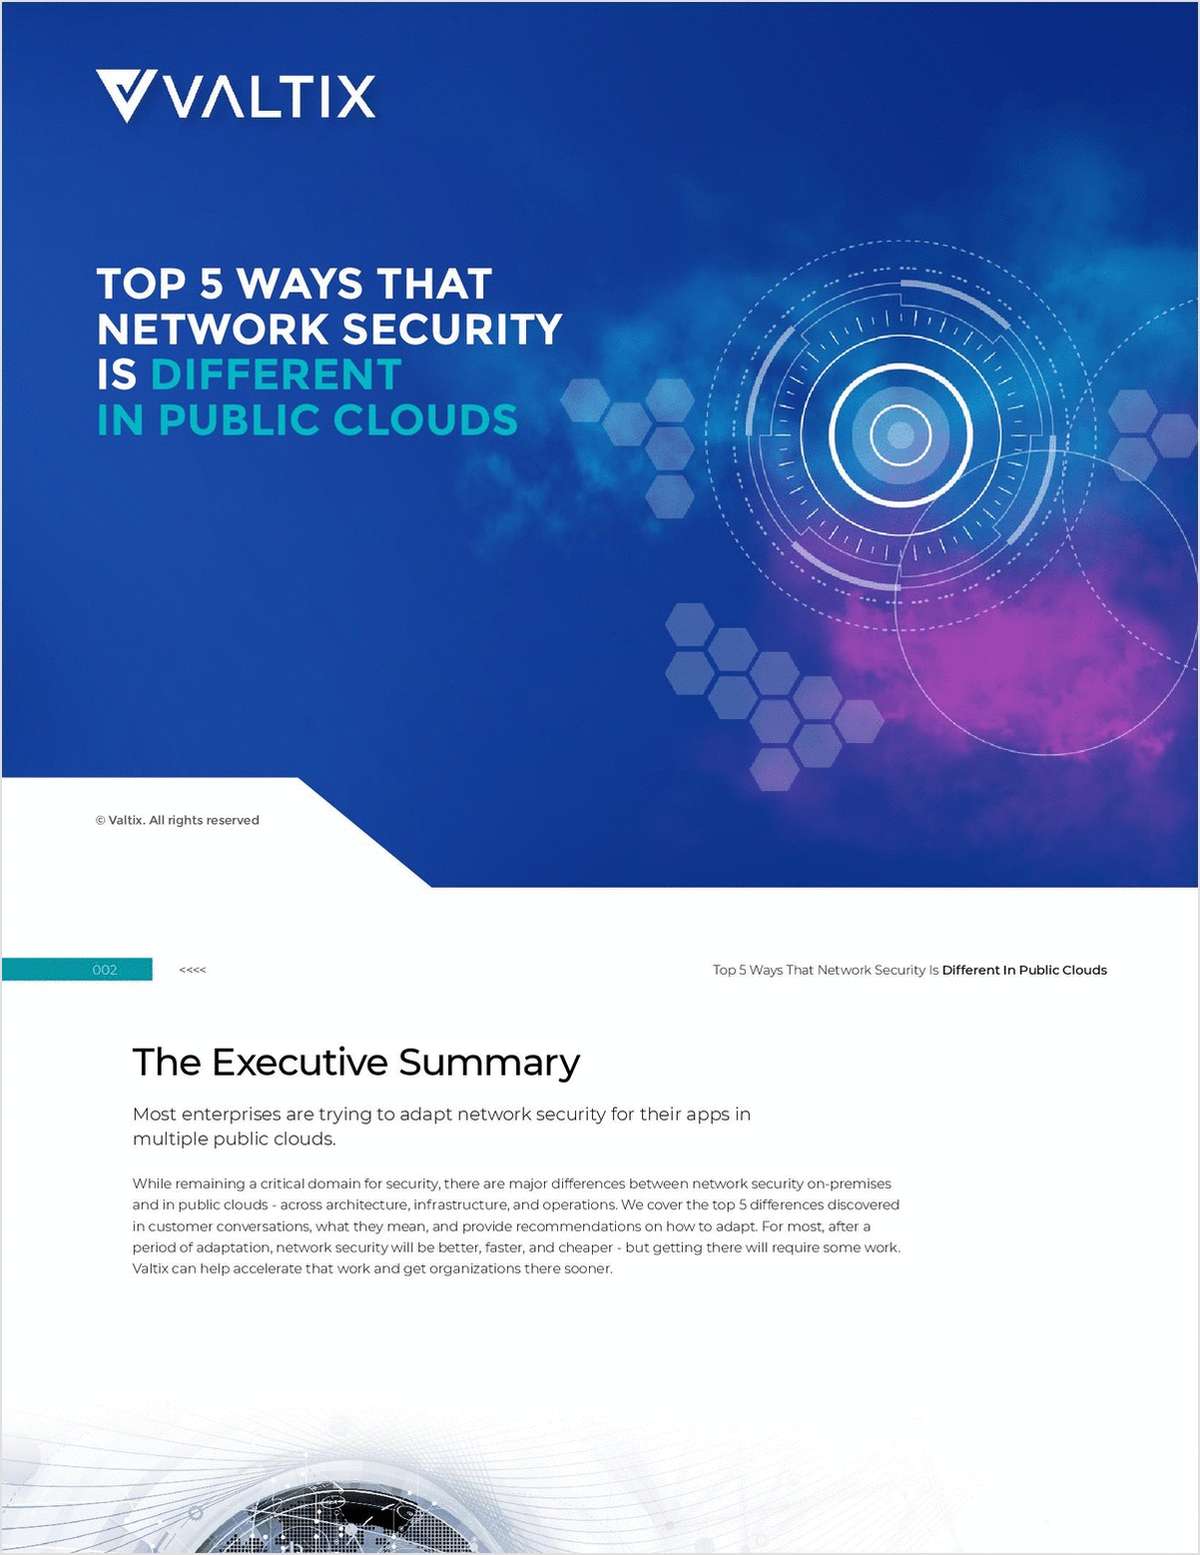 Top 5 Ways that Network Security is Different in Public Clouds